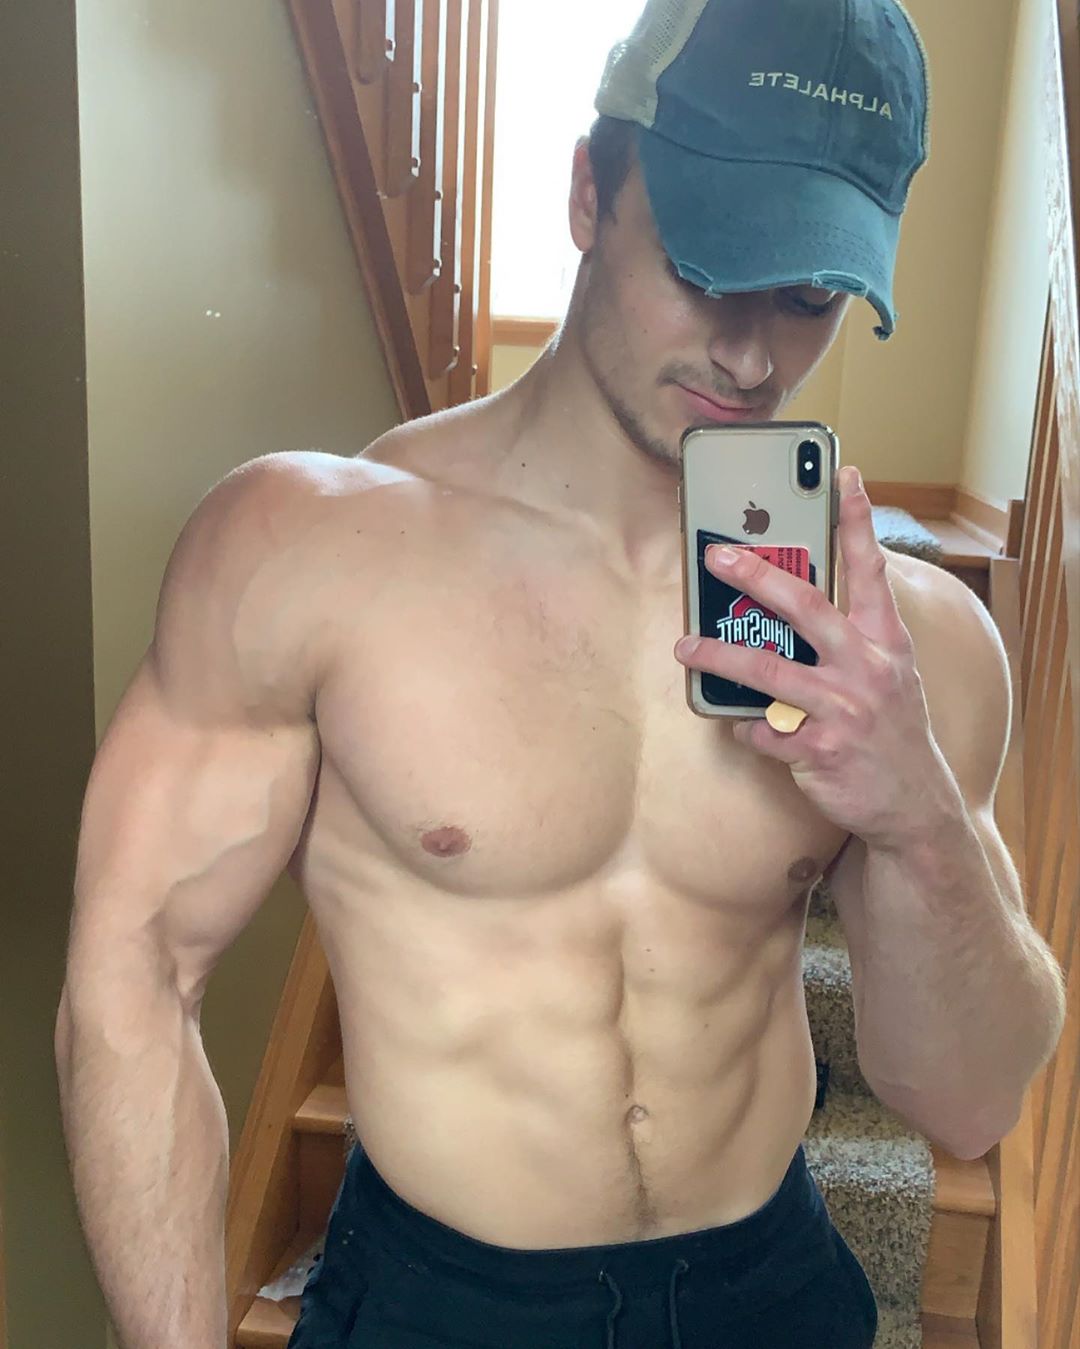 handsome-american-fit-guys-shirtless-sexy-muscular-college-teen-hunk-strong-country-body-boy-selfie